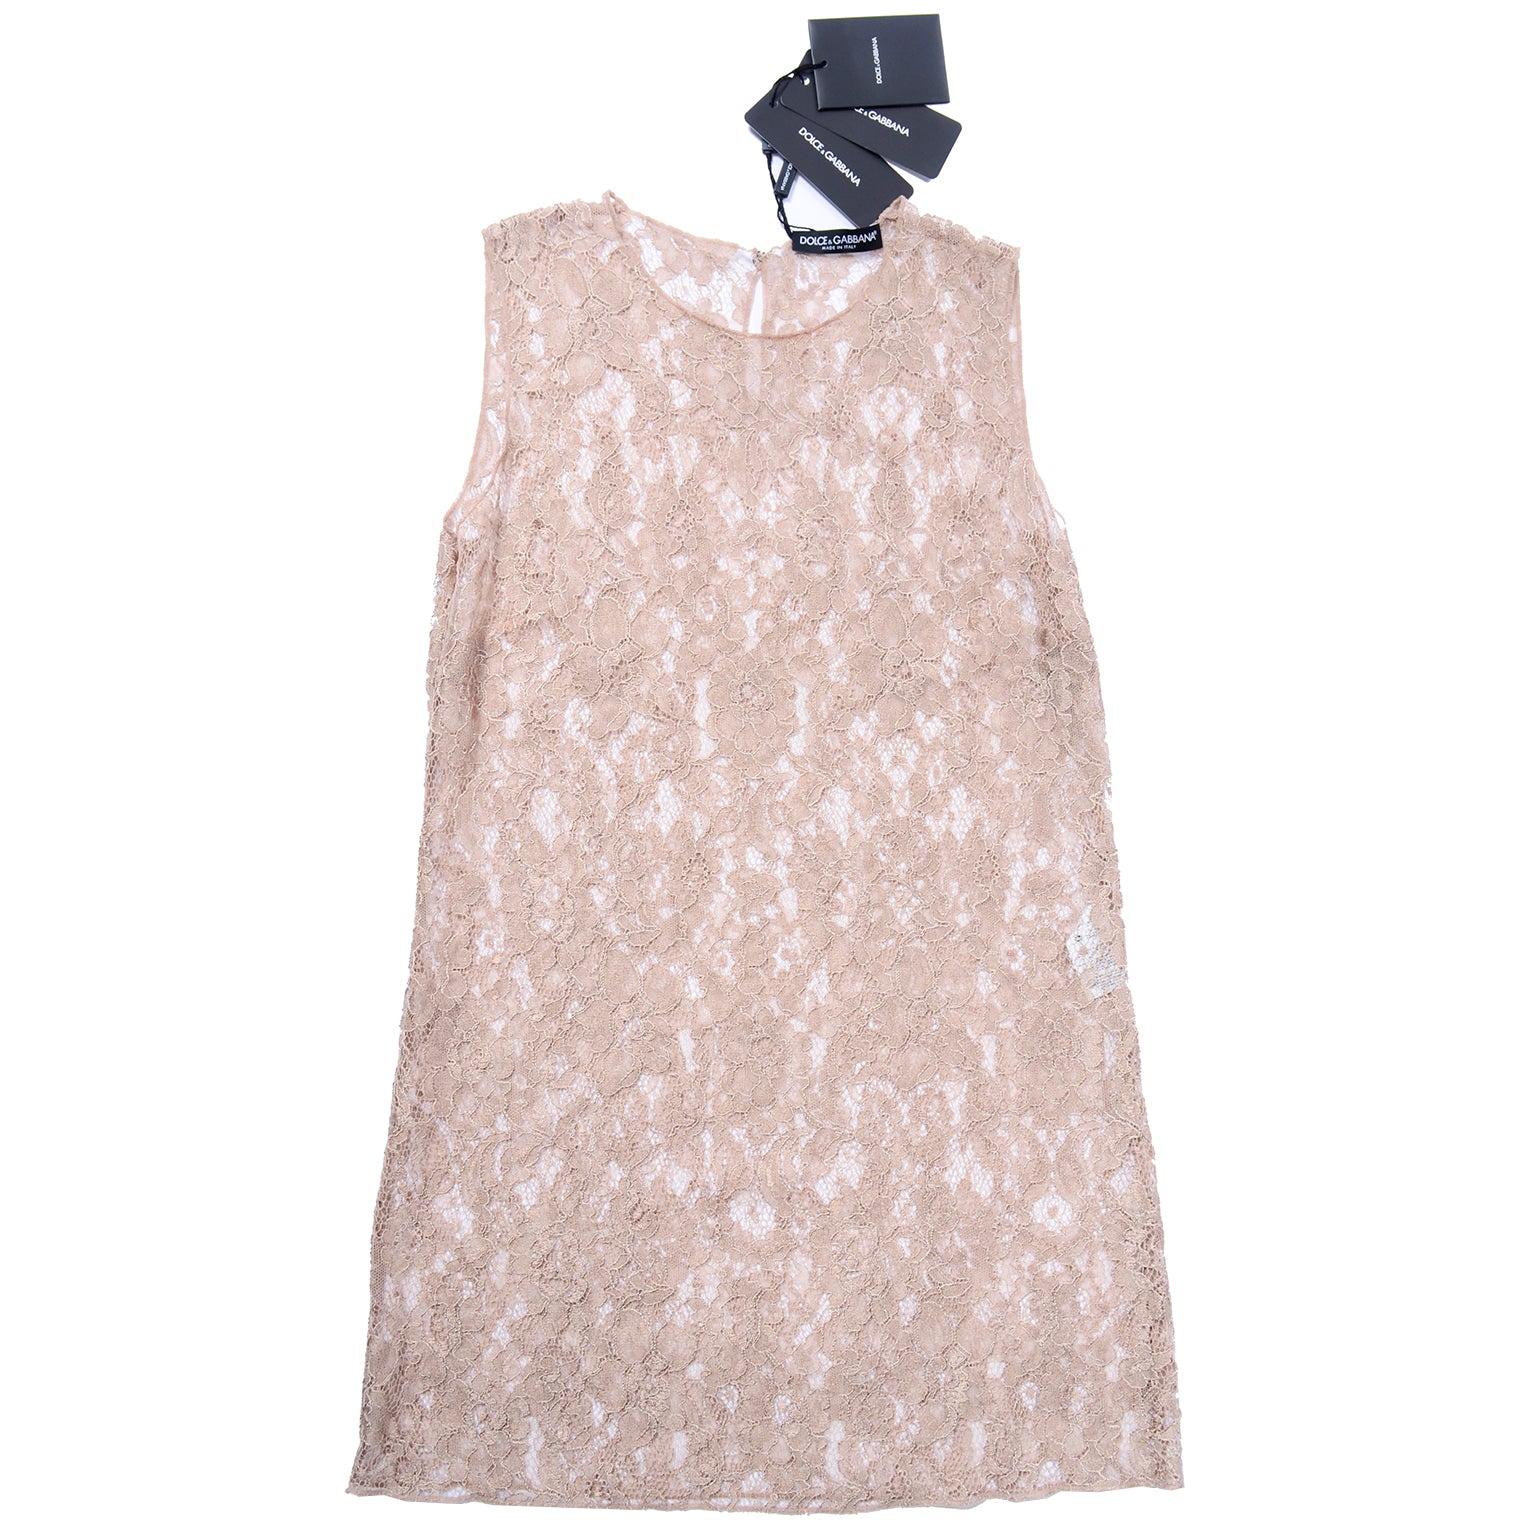 New with Tags Dolce & Gabbana Sleeveless Lace Mini Dress or Top